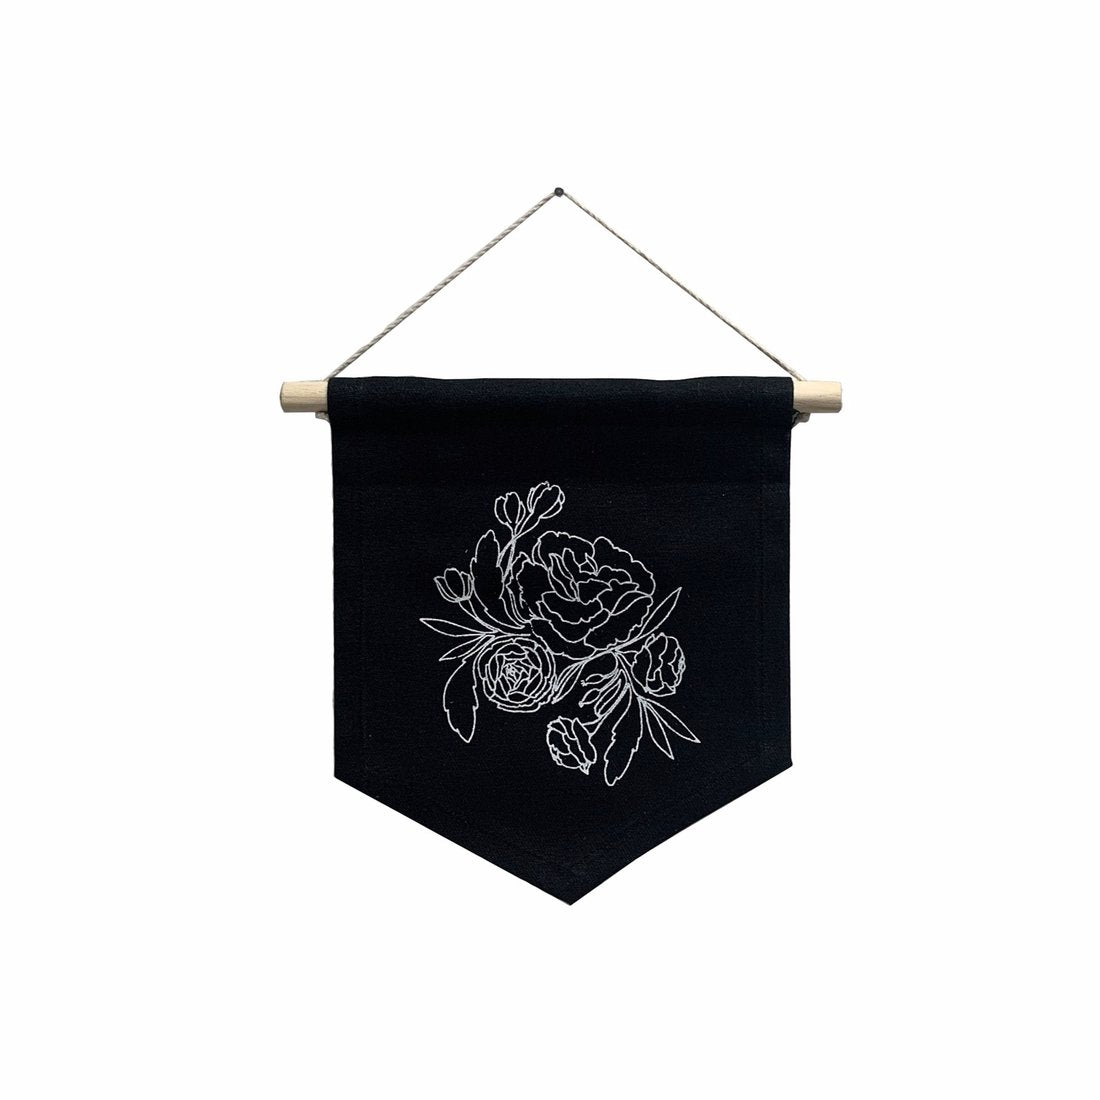 The Sarah Banner in Black